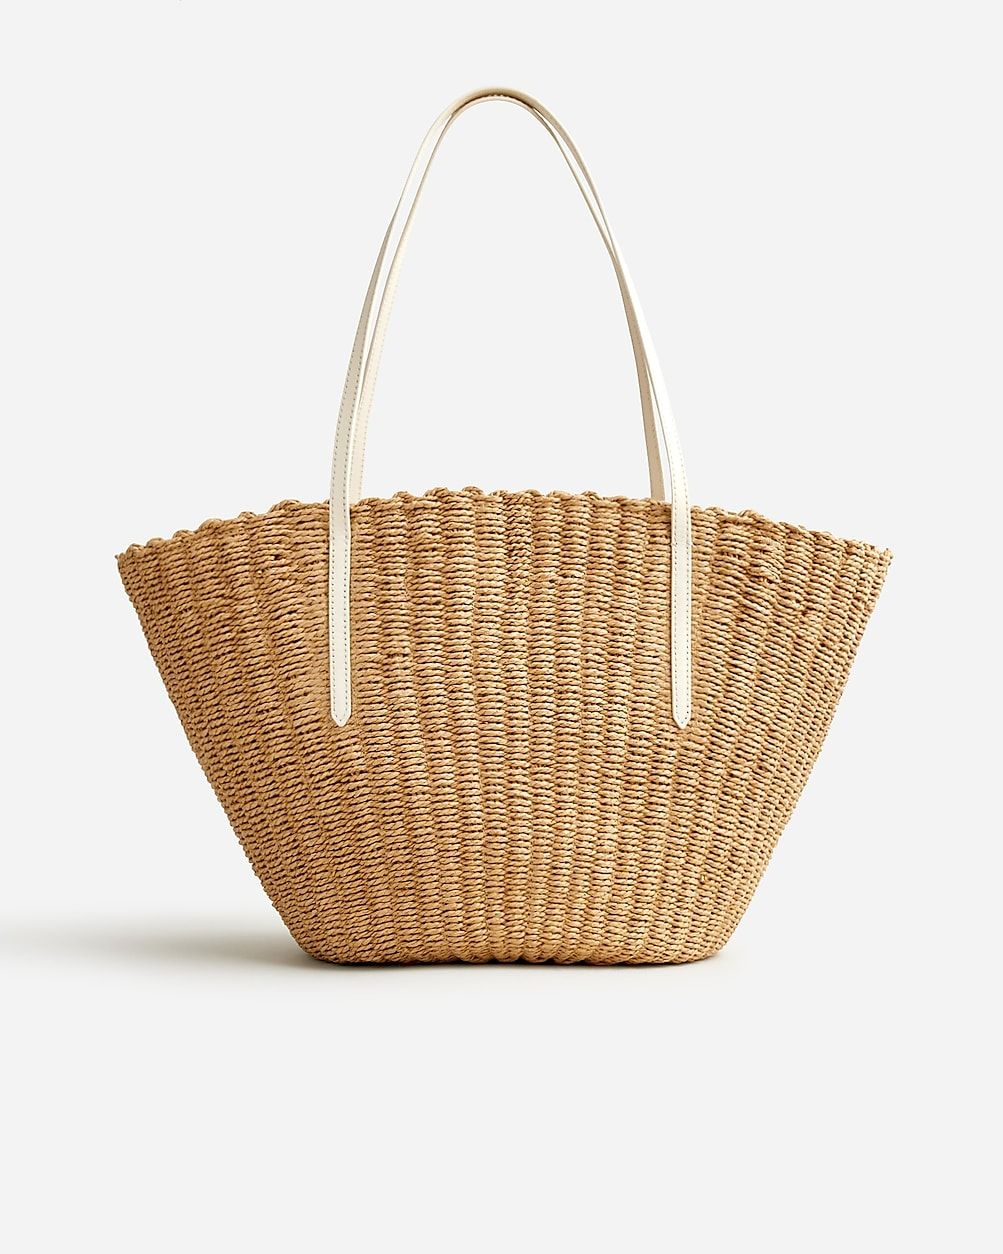 best seller4.9(24 REVIEWS)Como woven straw tote$118.00Select Colors$89.50Limited time. Price as m... | J.Crew US